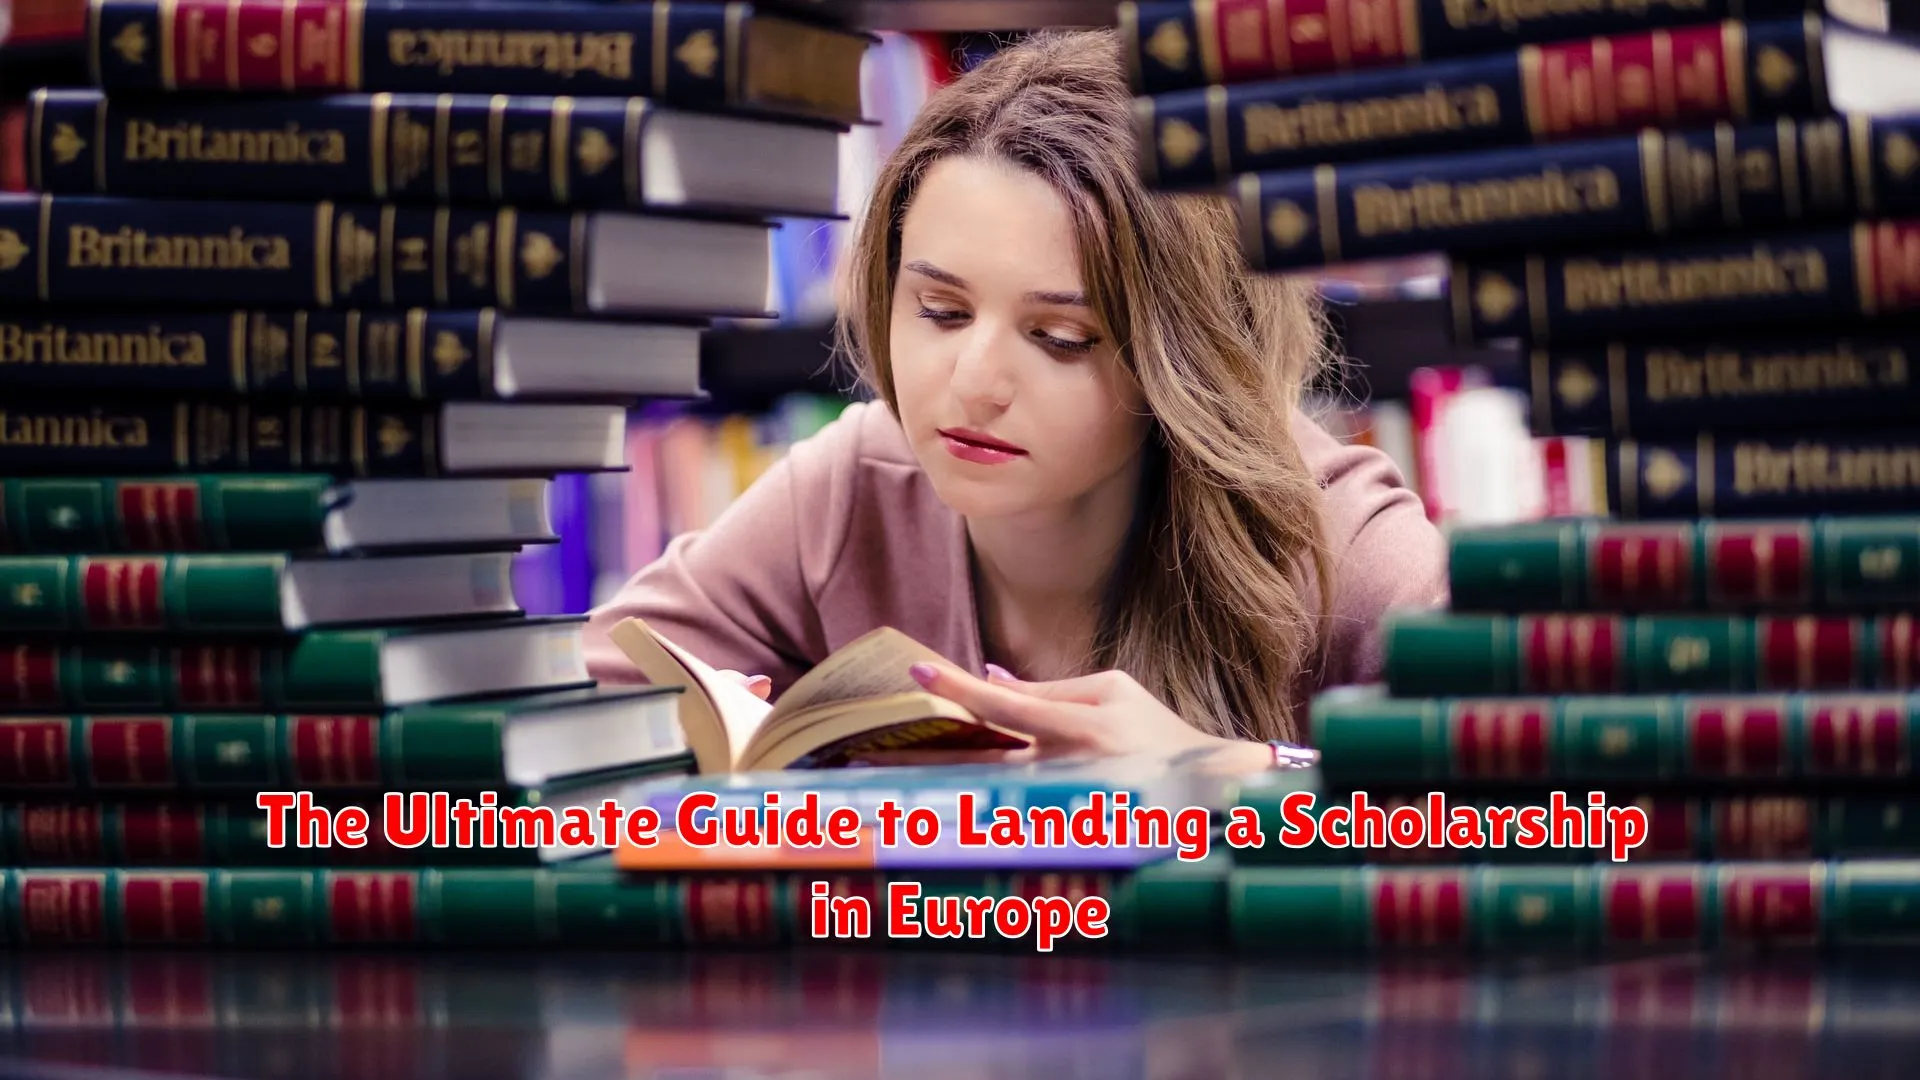 The Ultimate Guide to Landing a Scholarship in Europe